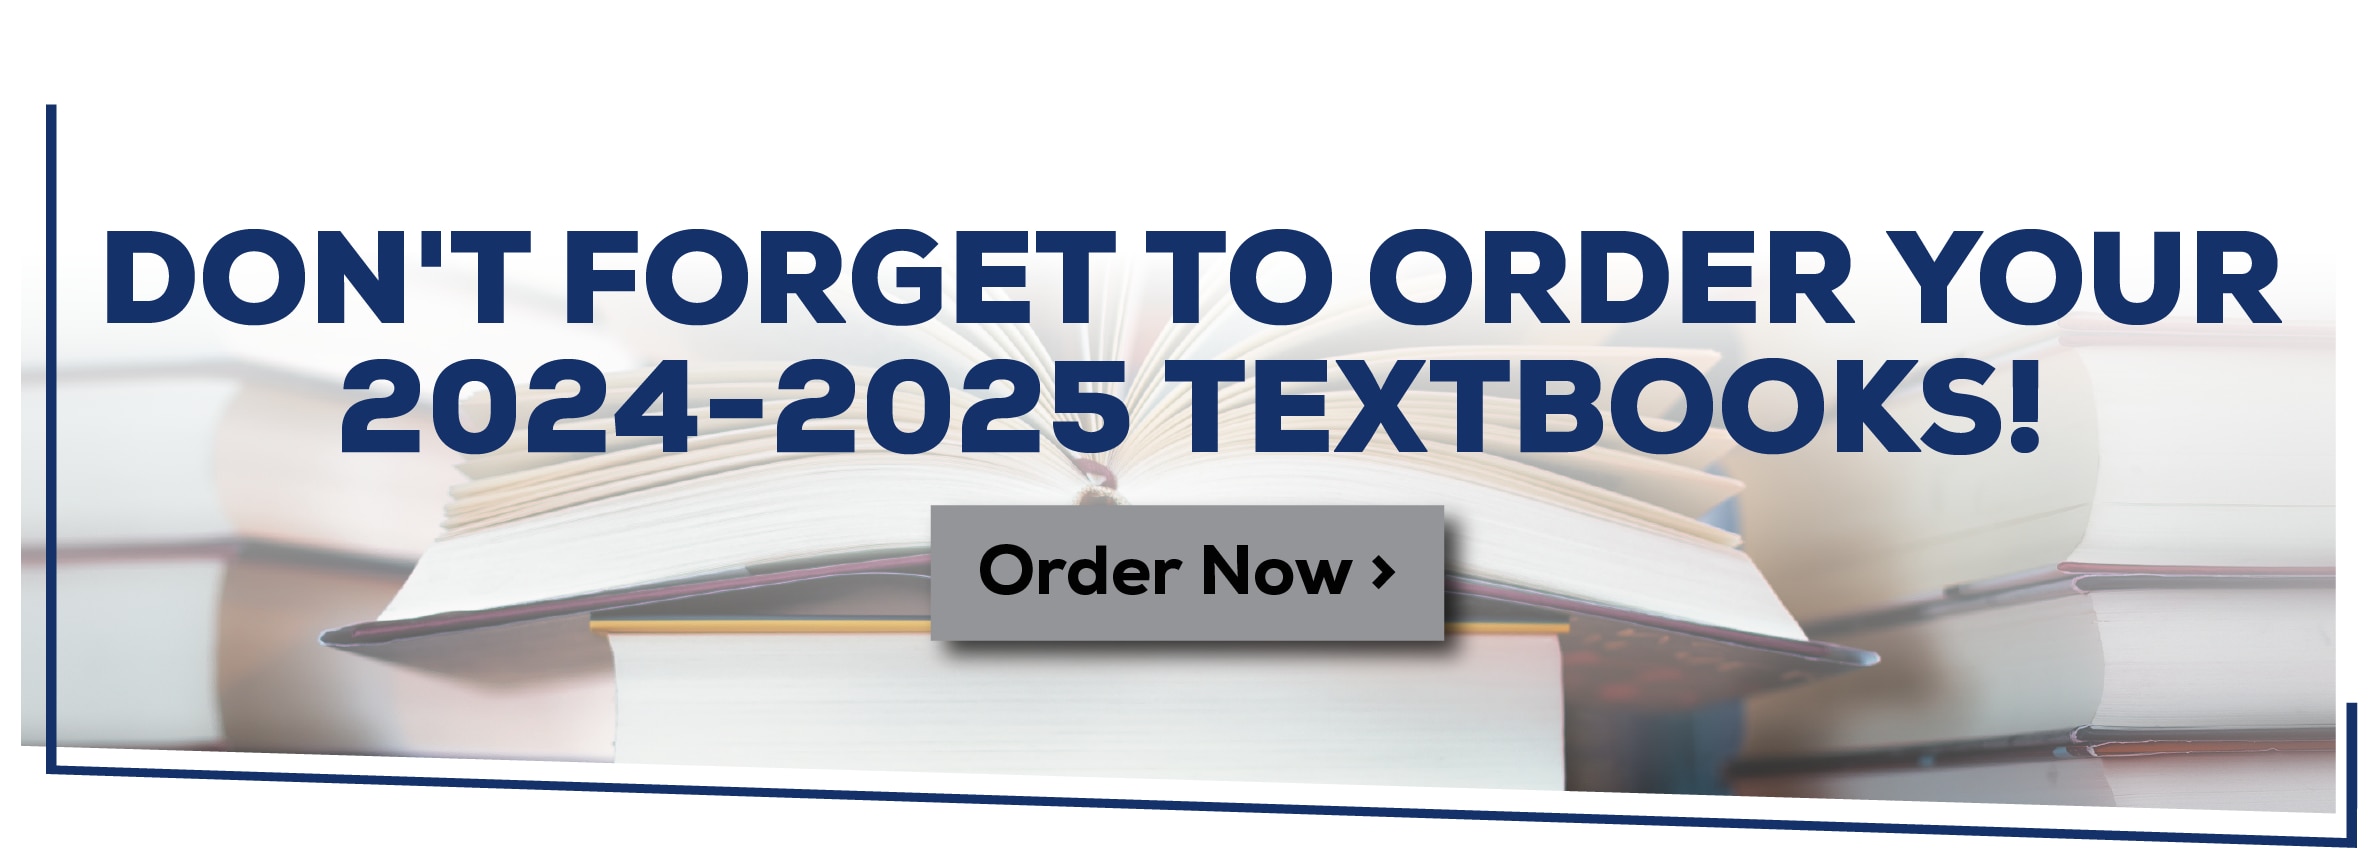 DON'T FORGET TO ORDER YOUR 2024-2025 TEXTBOOKS! Order Now